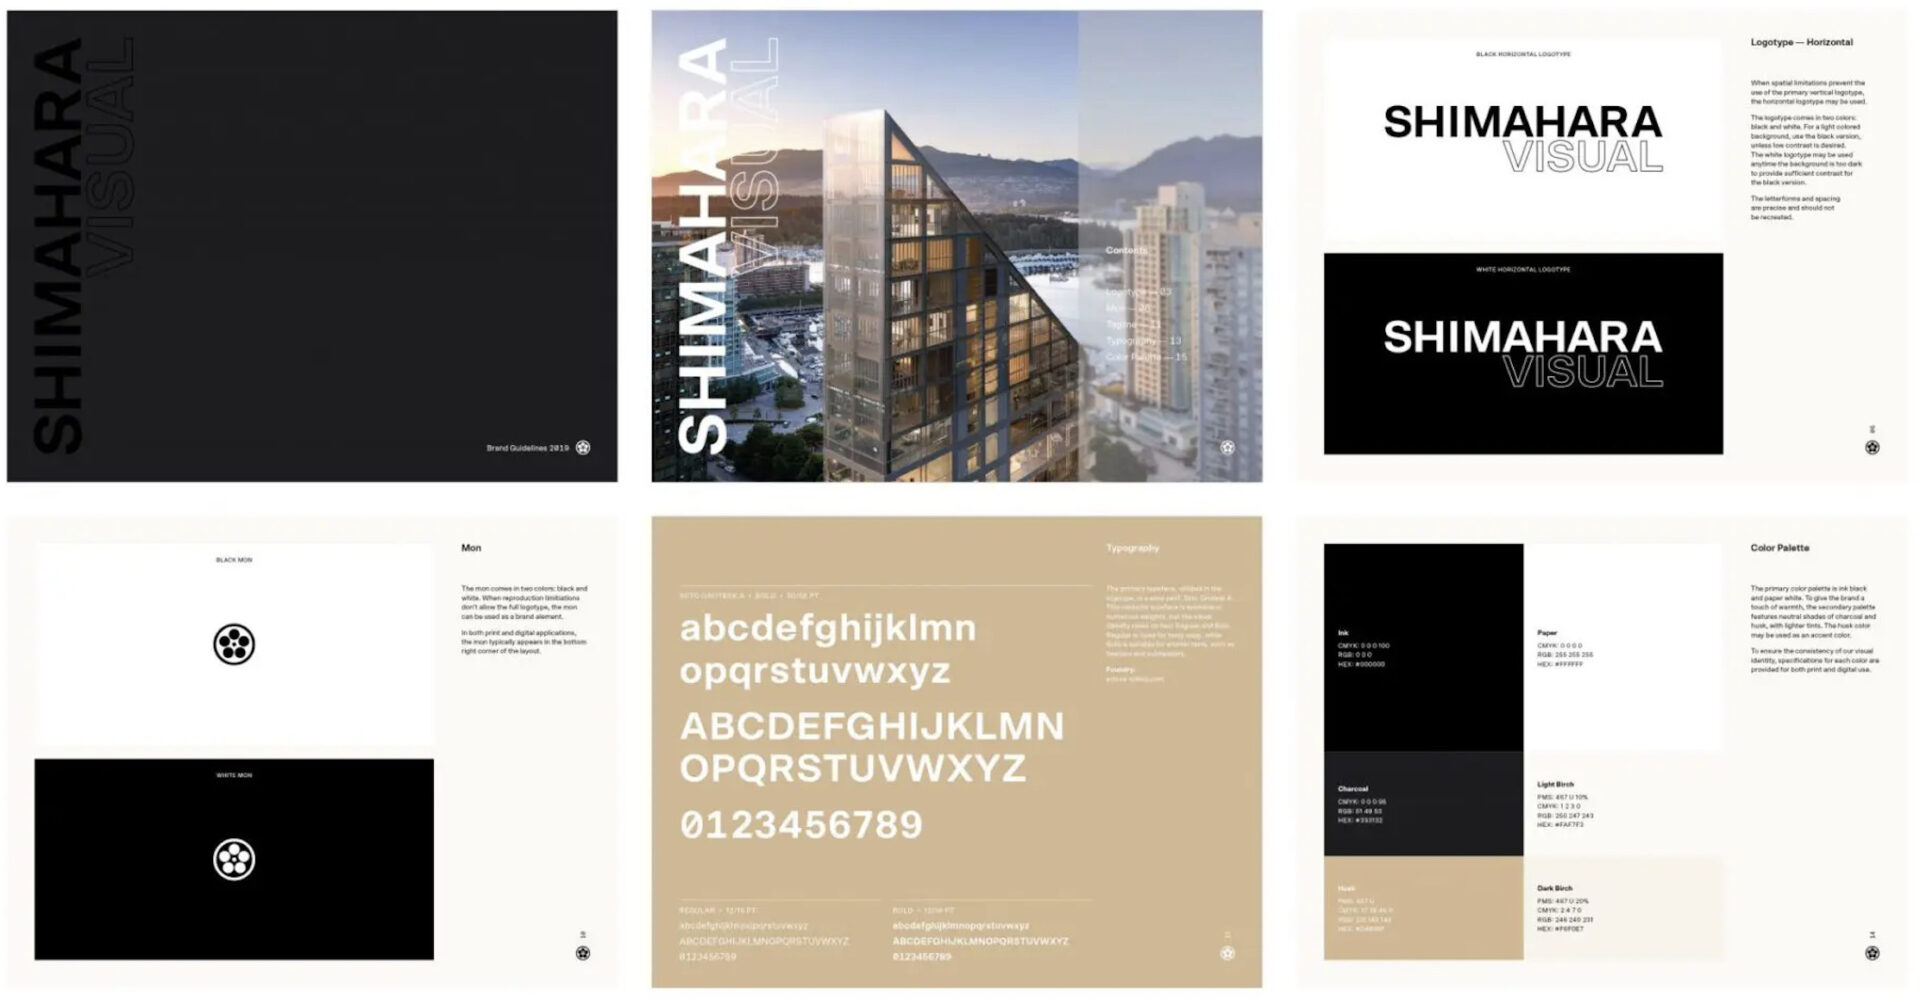 Shimahara Visual successful branding example created by Flux LA Agency offering brand reputation services